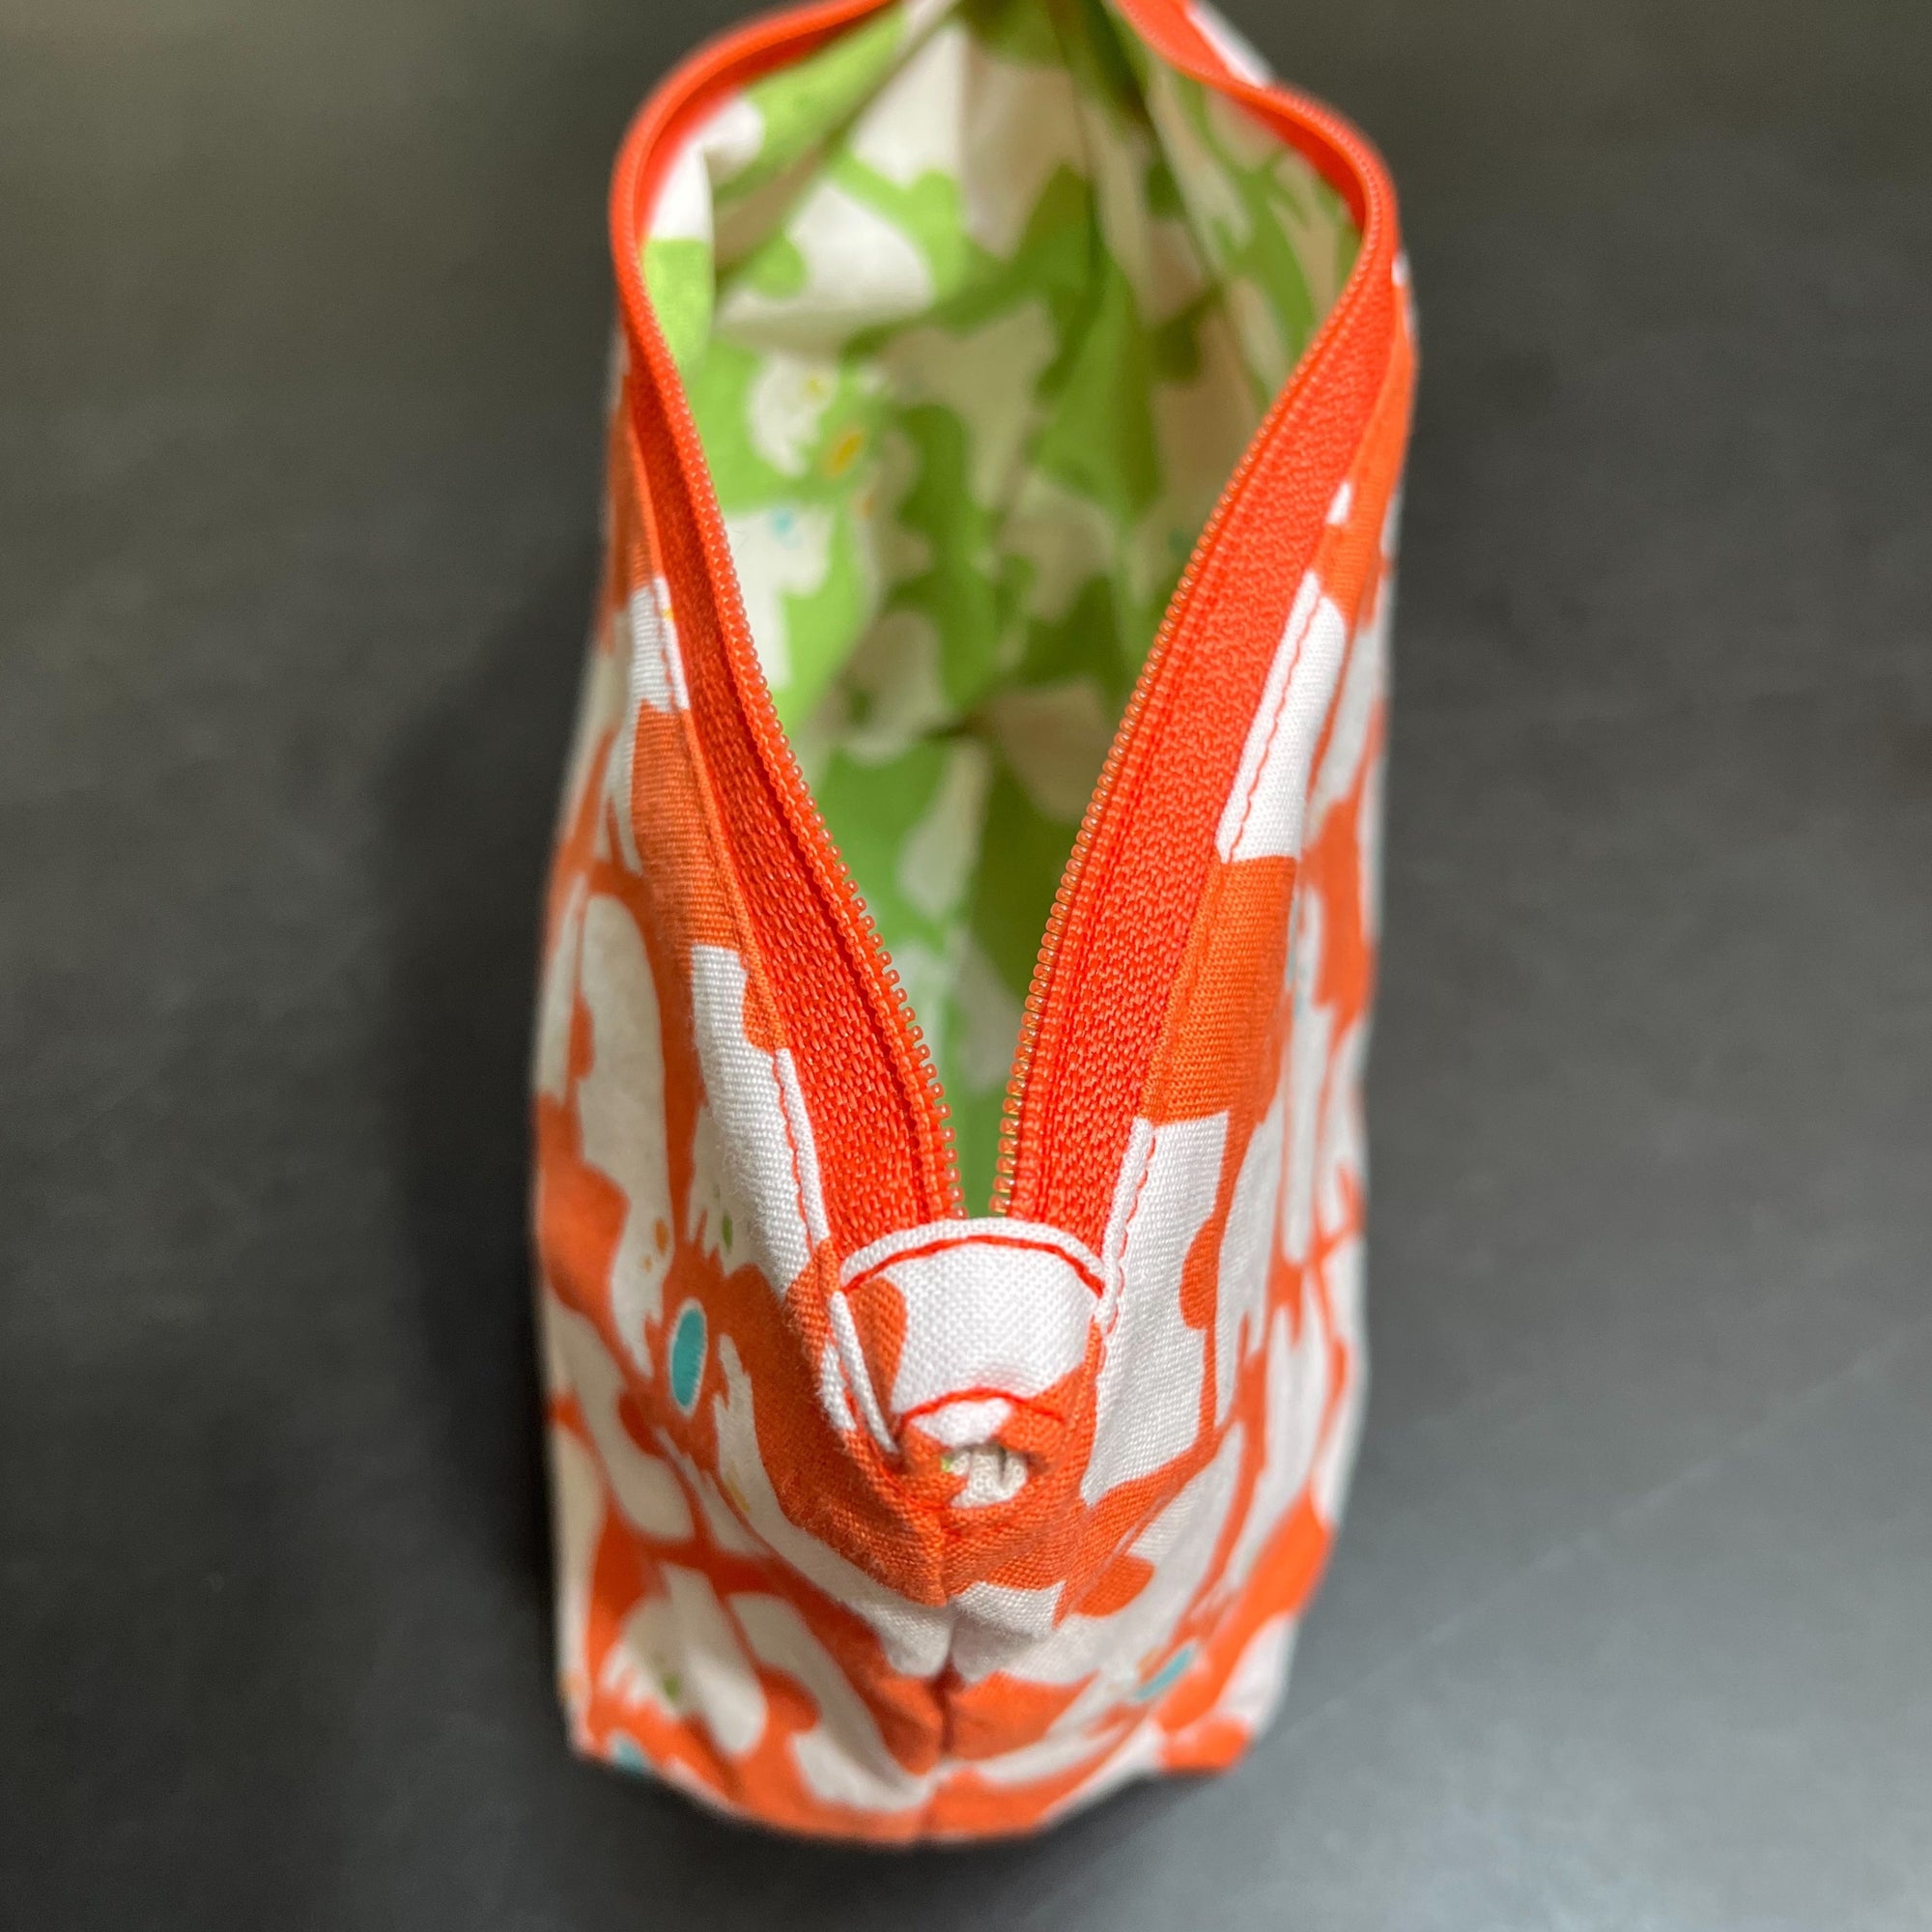 Example of a lined zipper pouch with a box bottom so it stands on its own. The exterior fabric is orange and white and the interior is lime green and white. It has a bright orange zipper. 